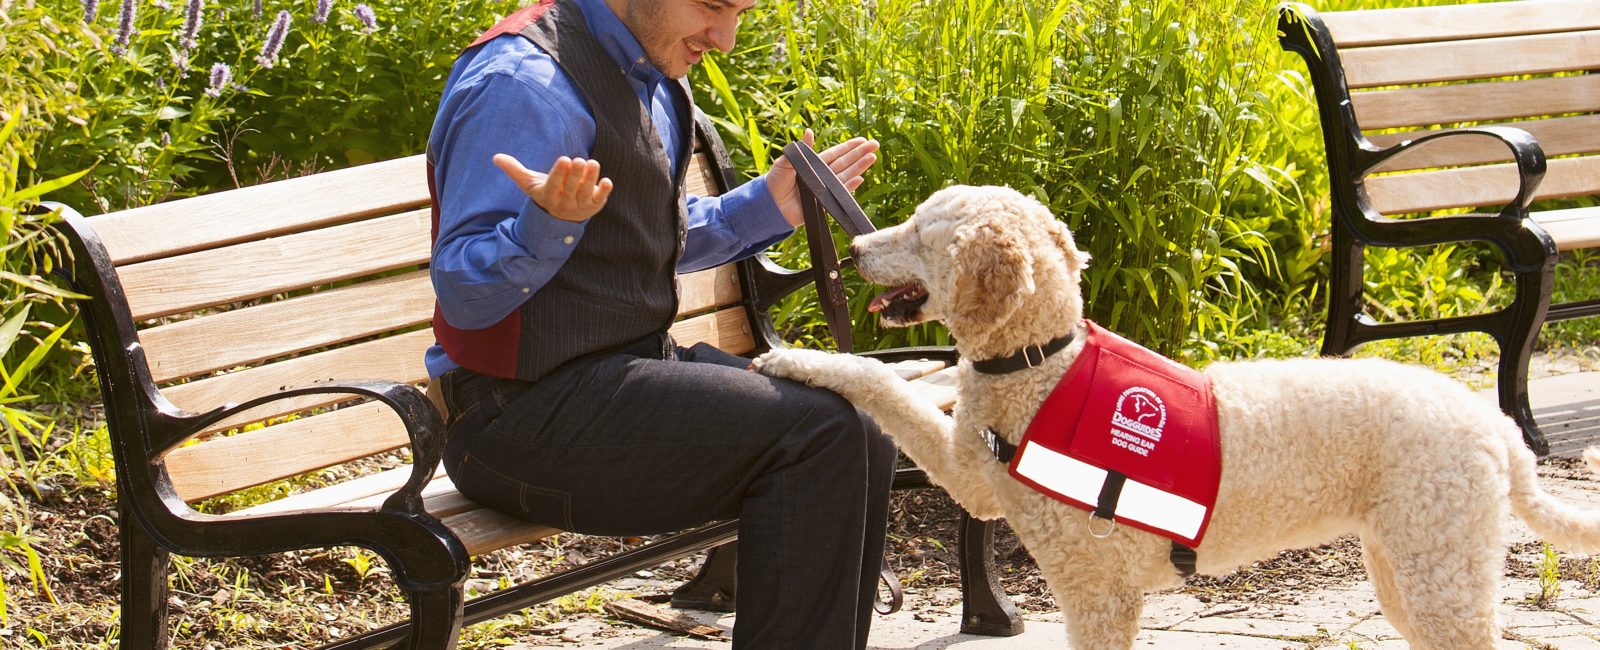 A Male client sits on a bench with his Hearing Dog Guide alerting him